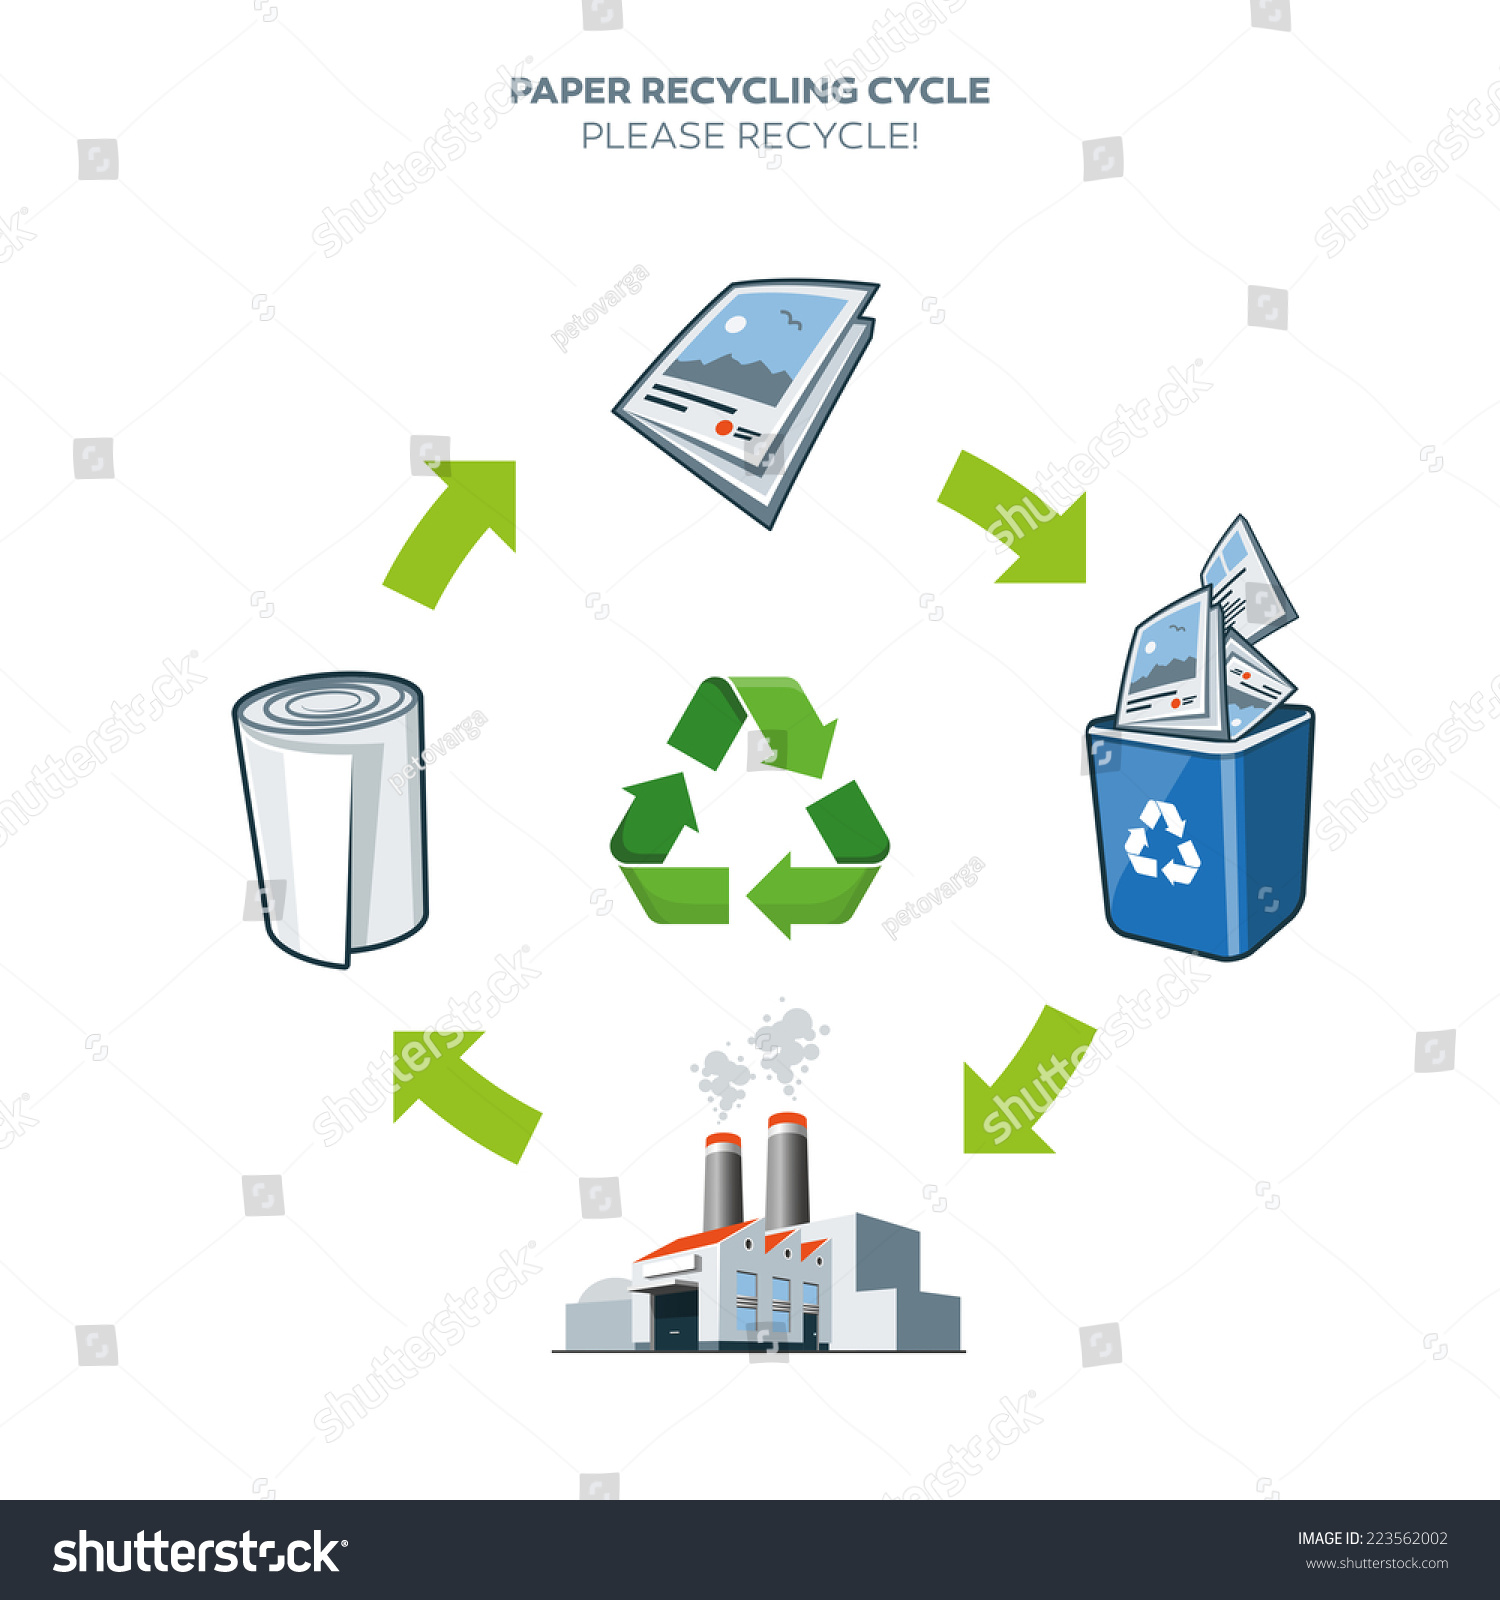 Thesis statement for recycling essay